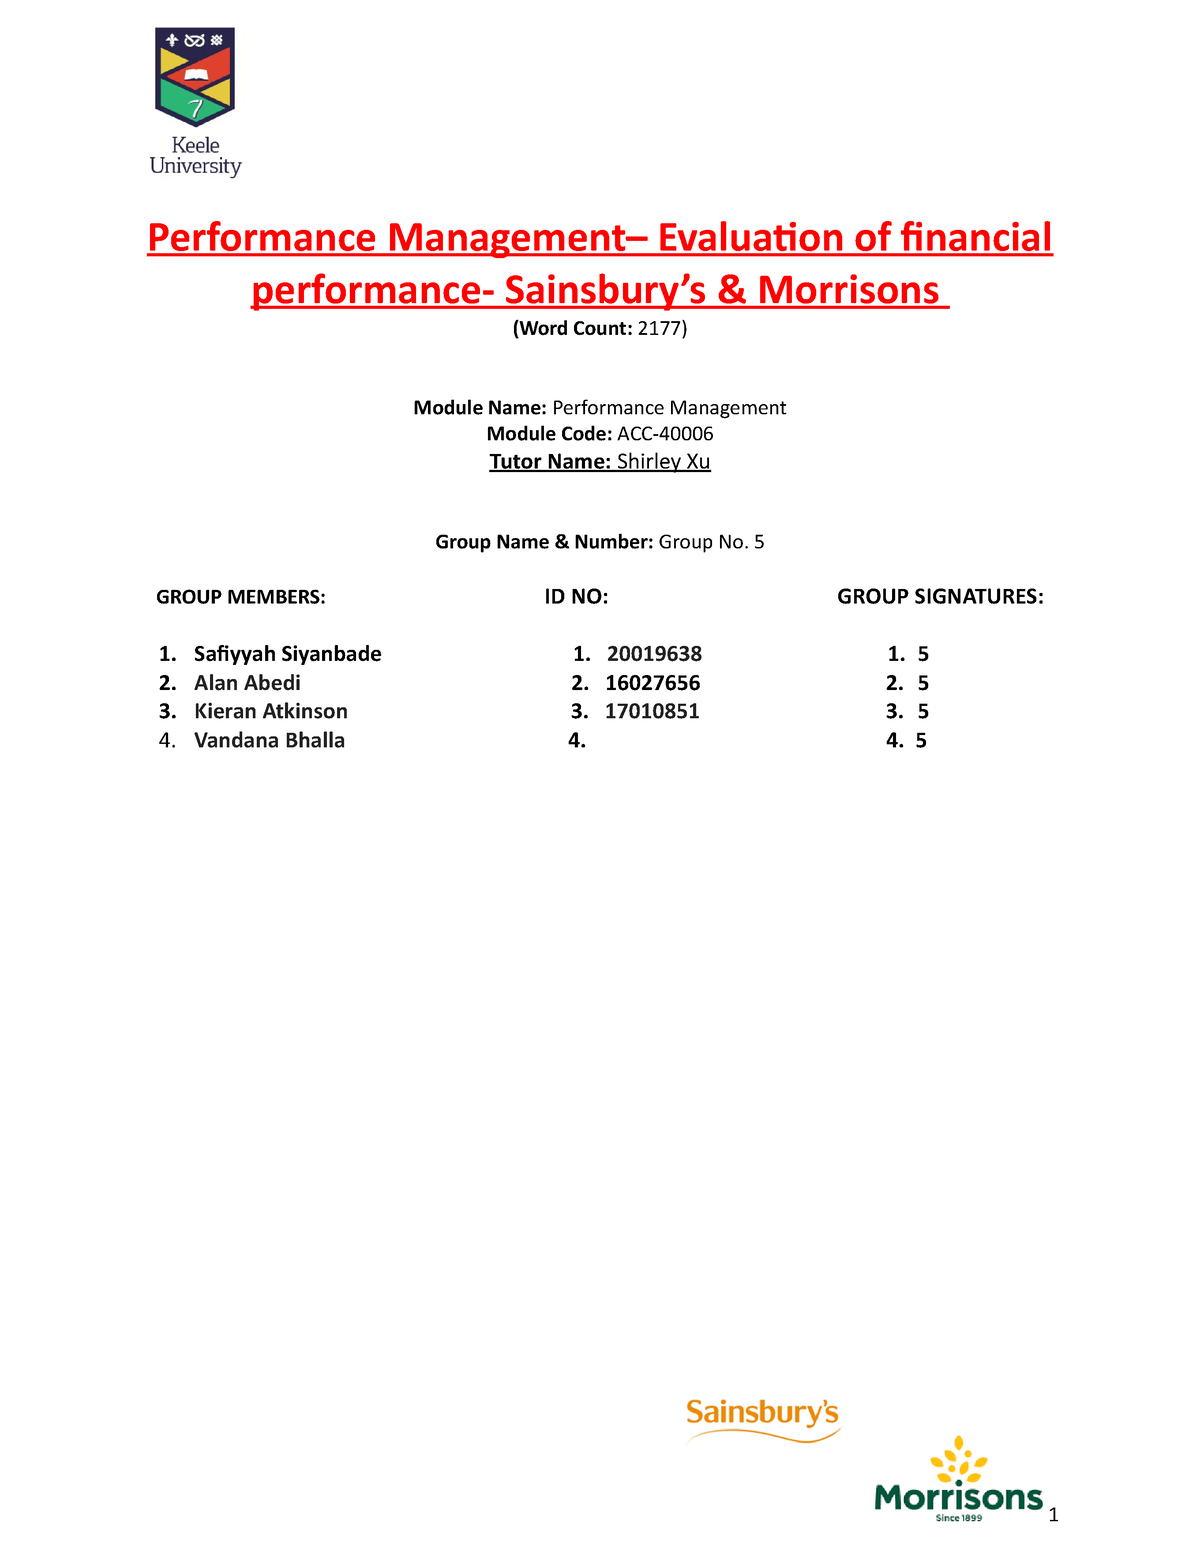 short case study on performance management with solution